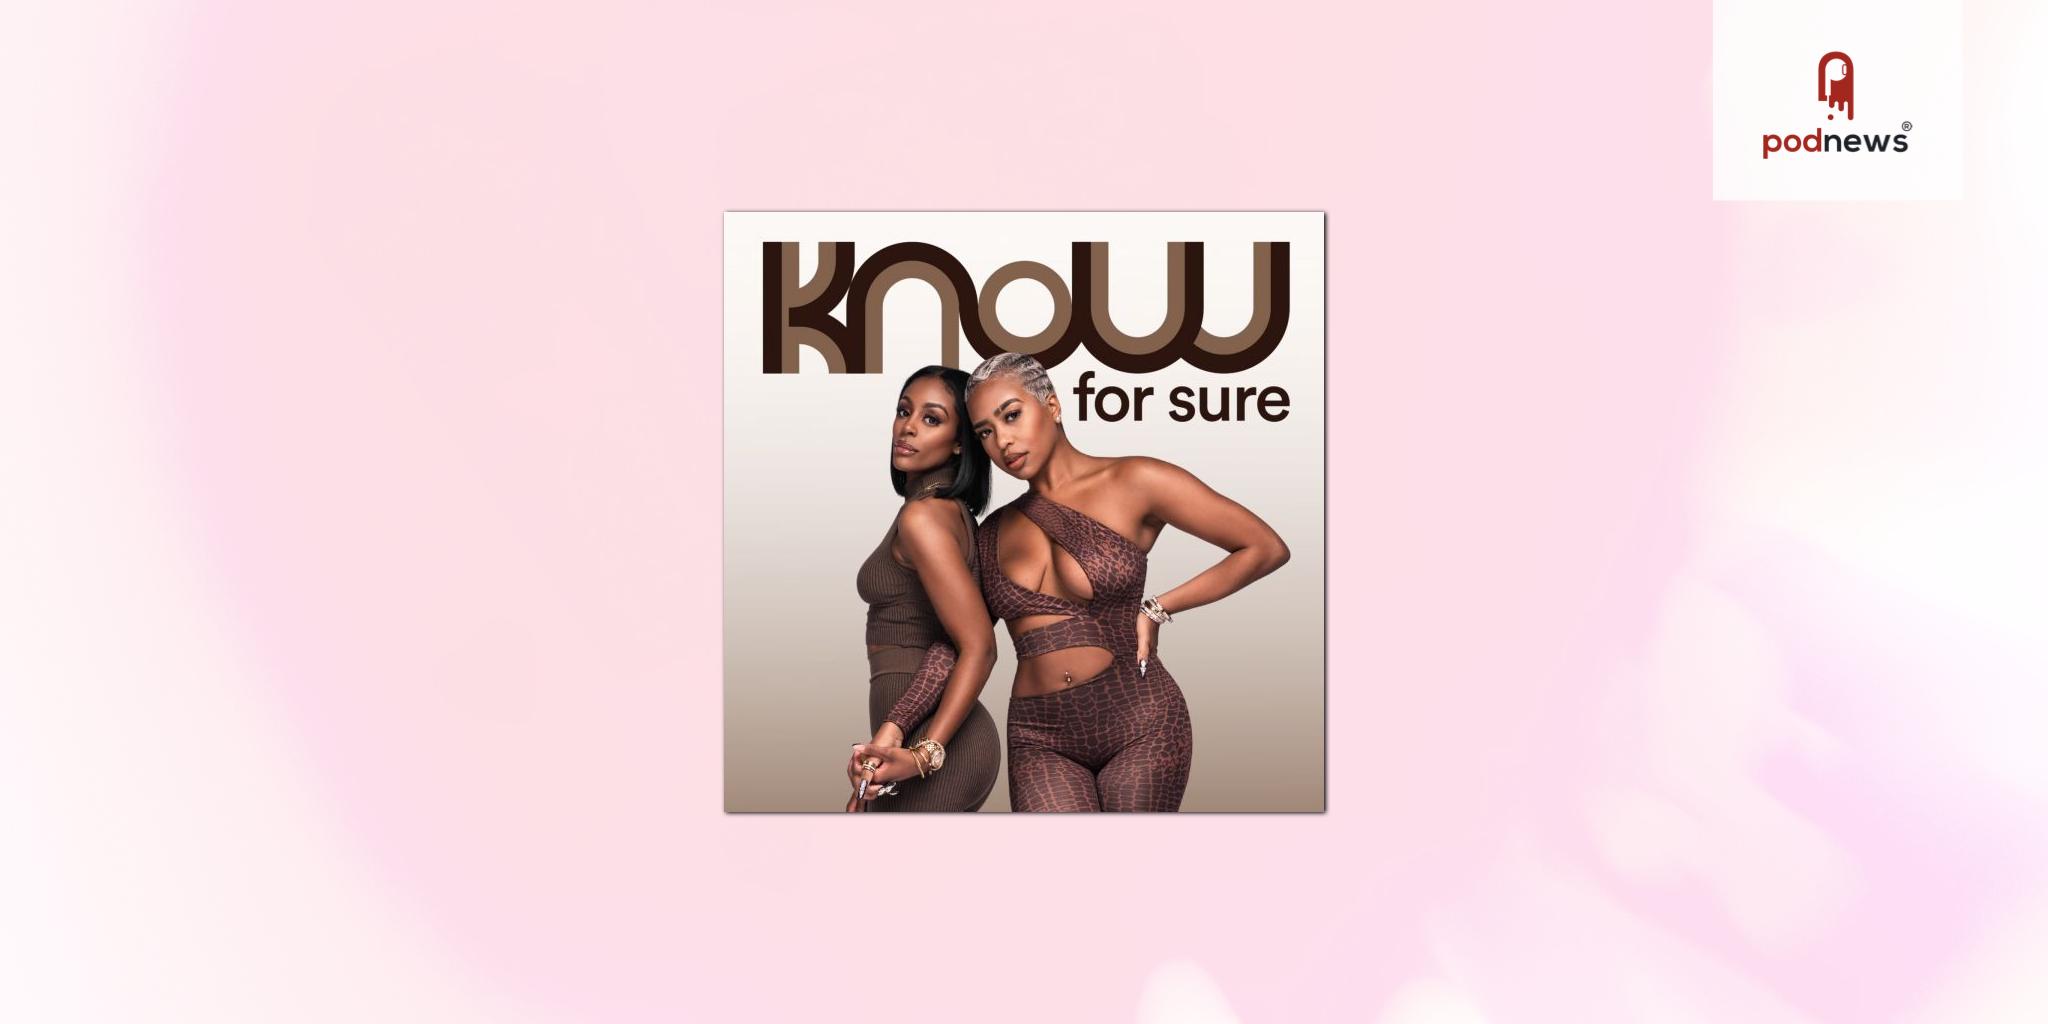 The Know For Sure Pod- with over 6M listens in 3 months, signs exclusively with Gumball